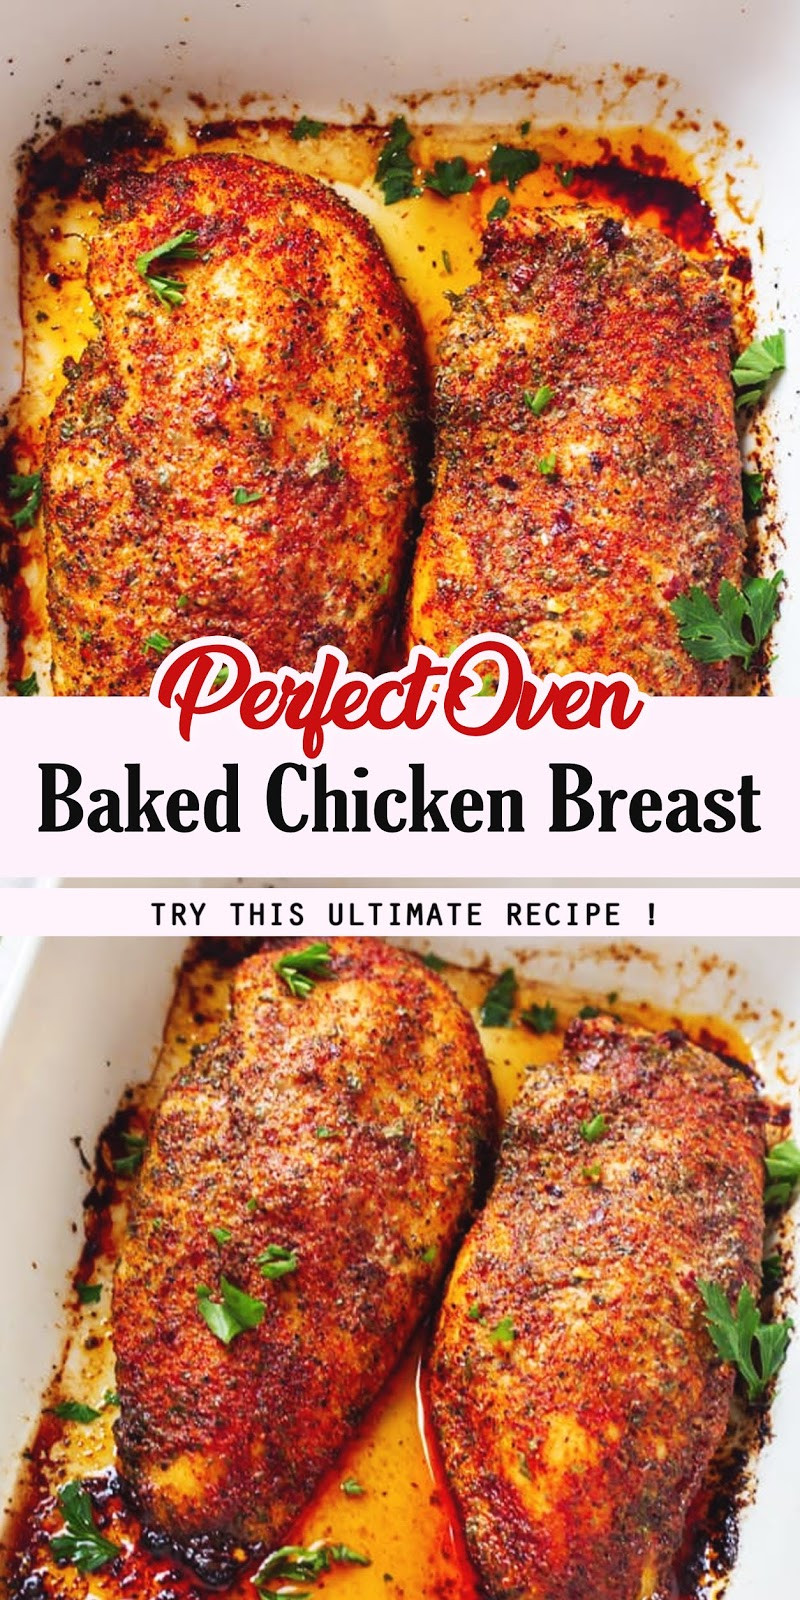 Perfect Baked Chicken Breast
 Perfect Oven Baked Chicken Breast 3 SECONDS